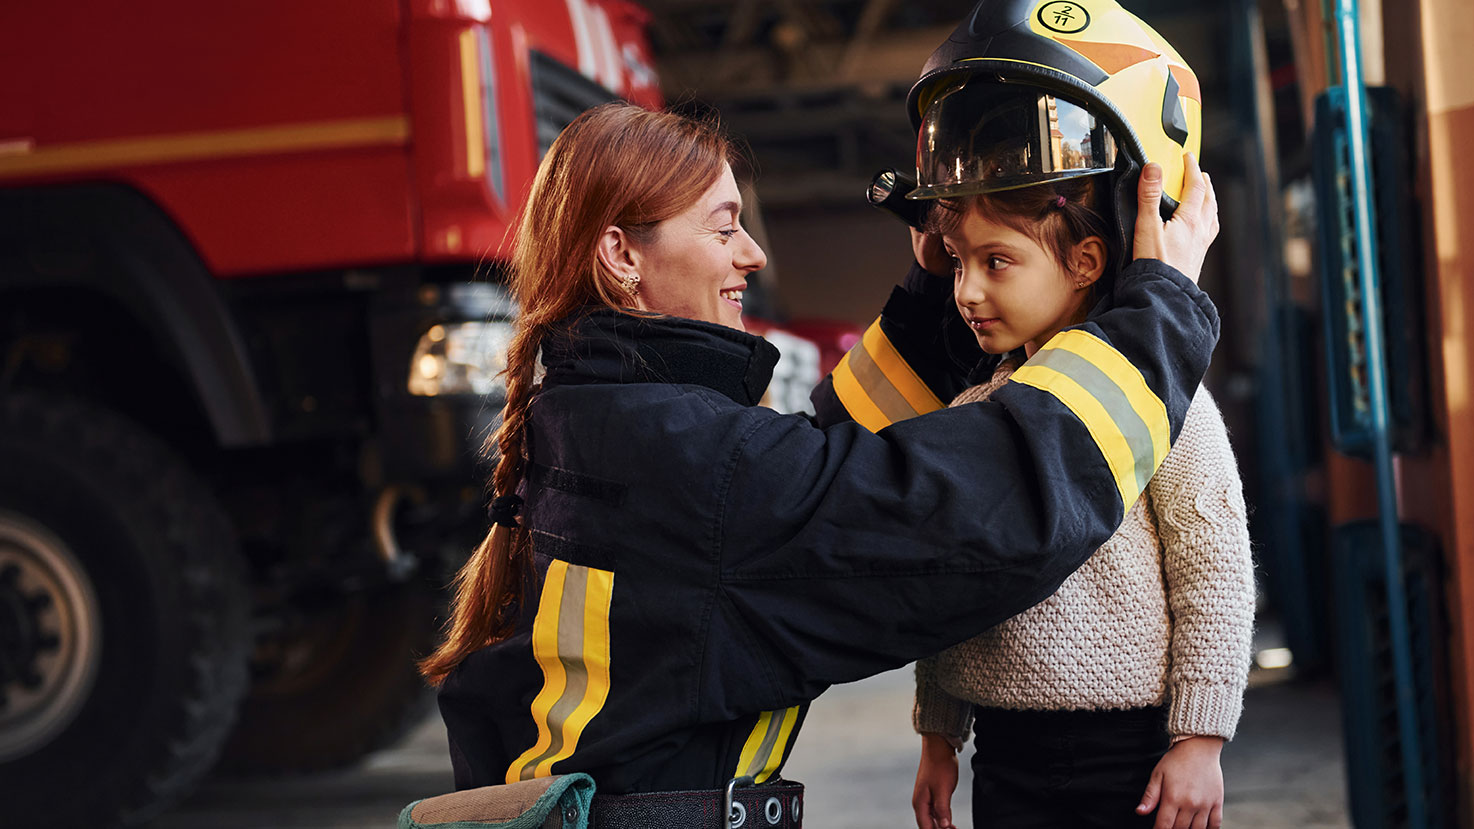 Fire fighter placing hat on child